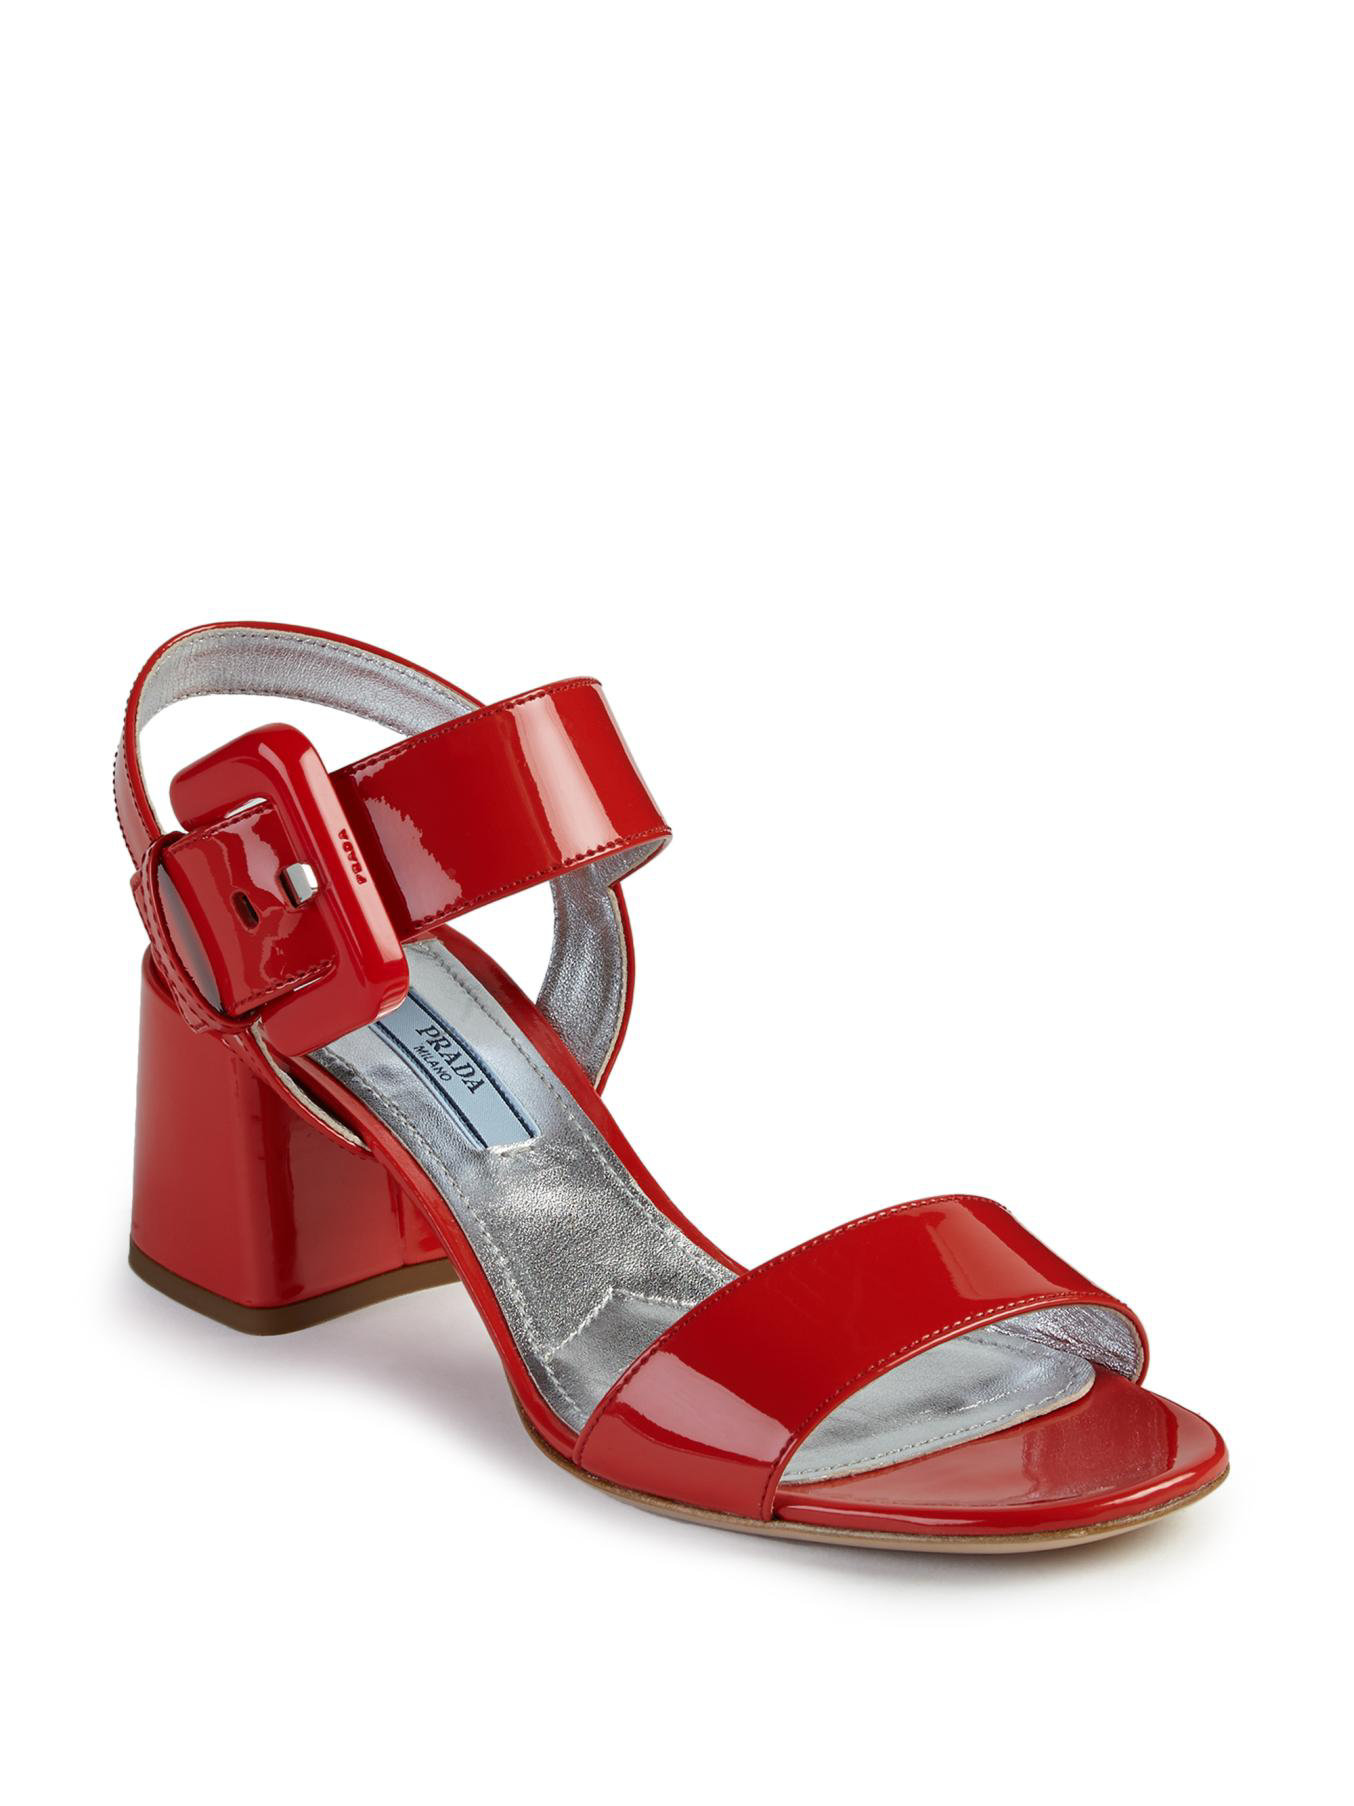 Prada Patent Leather Mid-heel Sandals in Red - Lyst